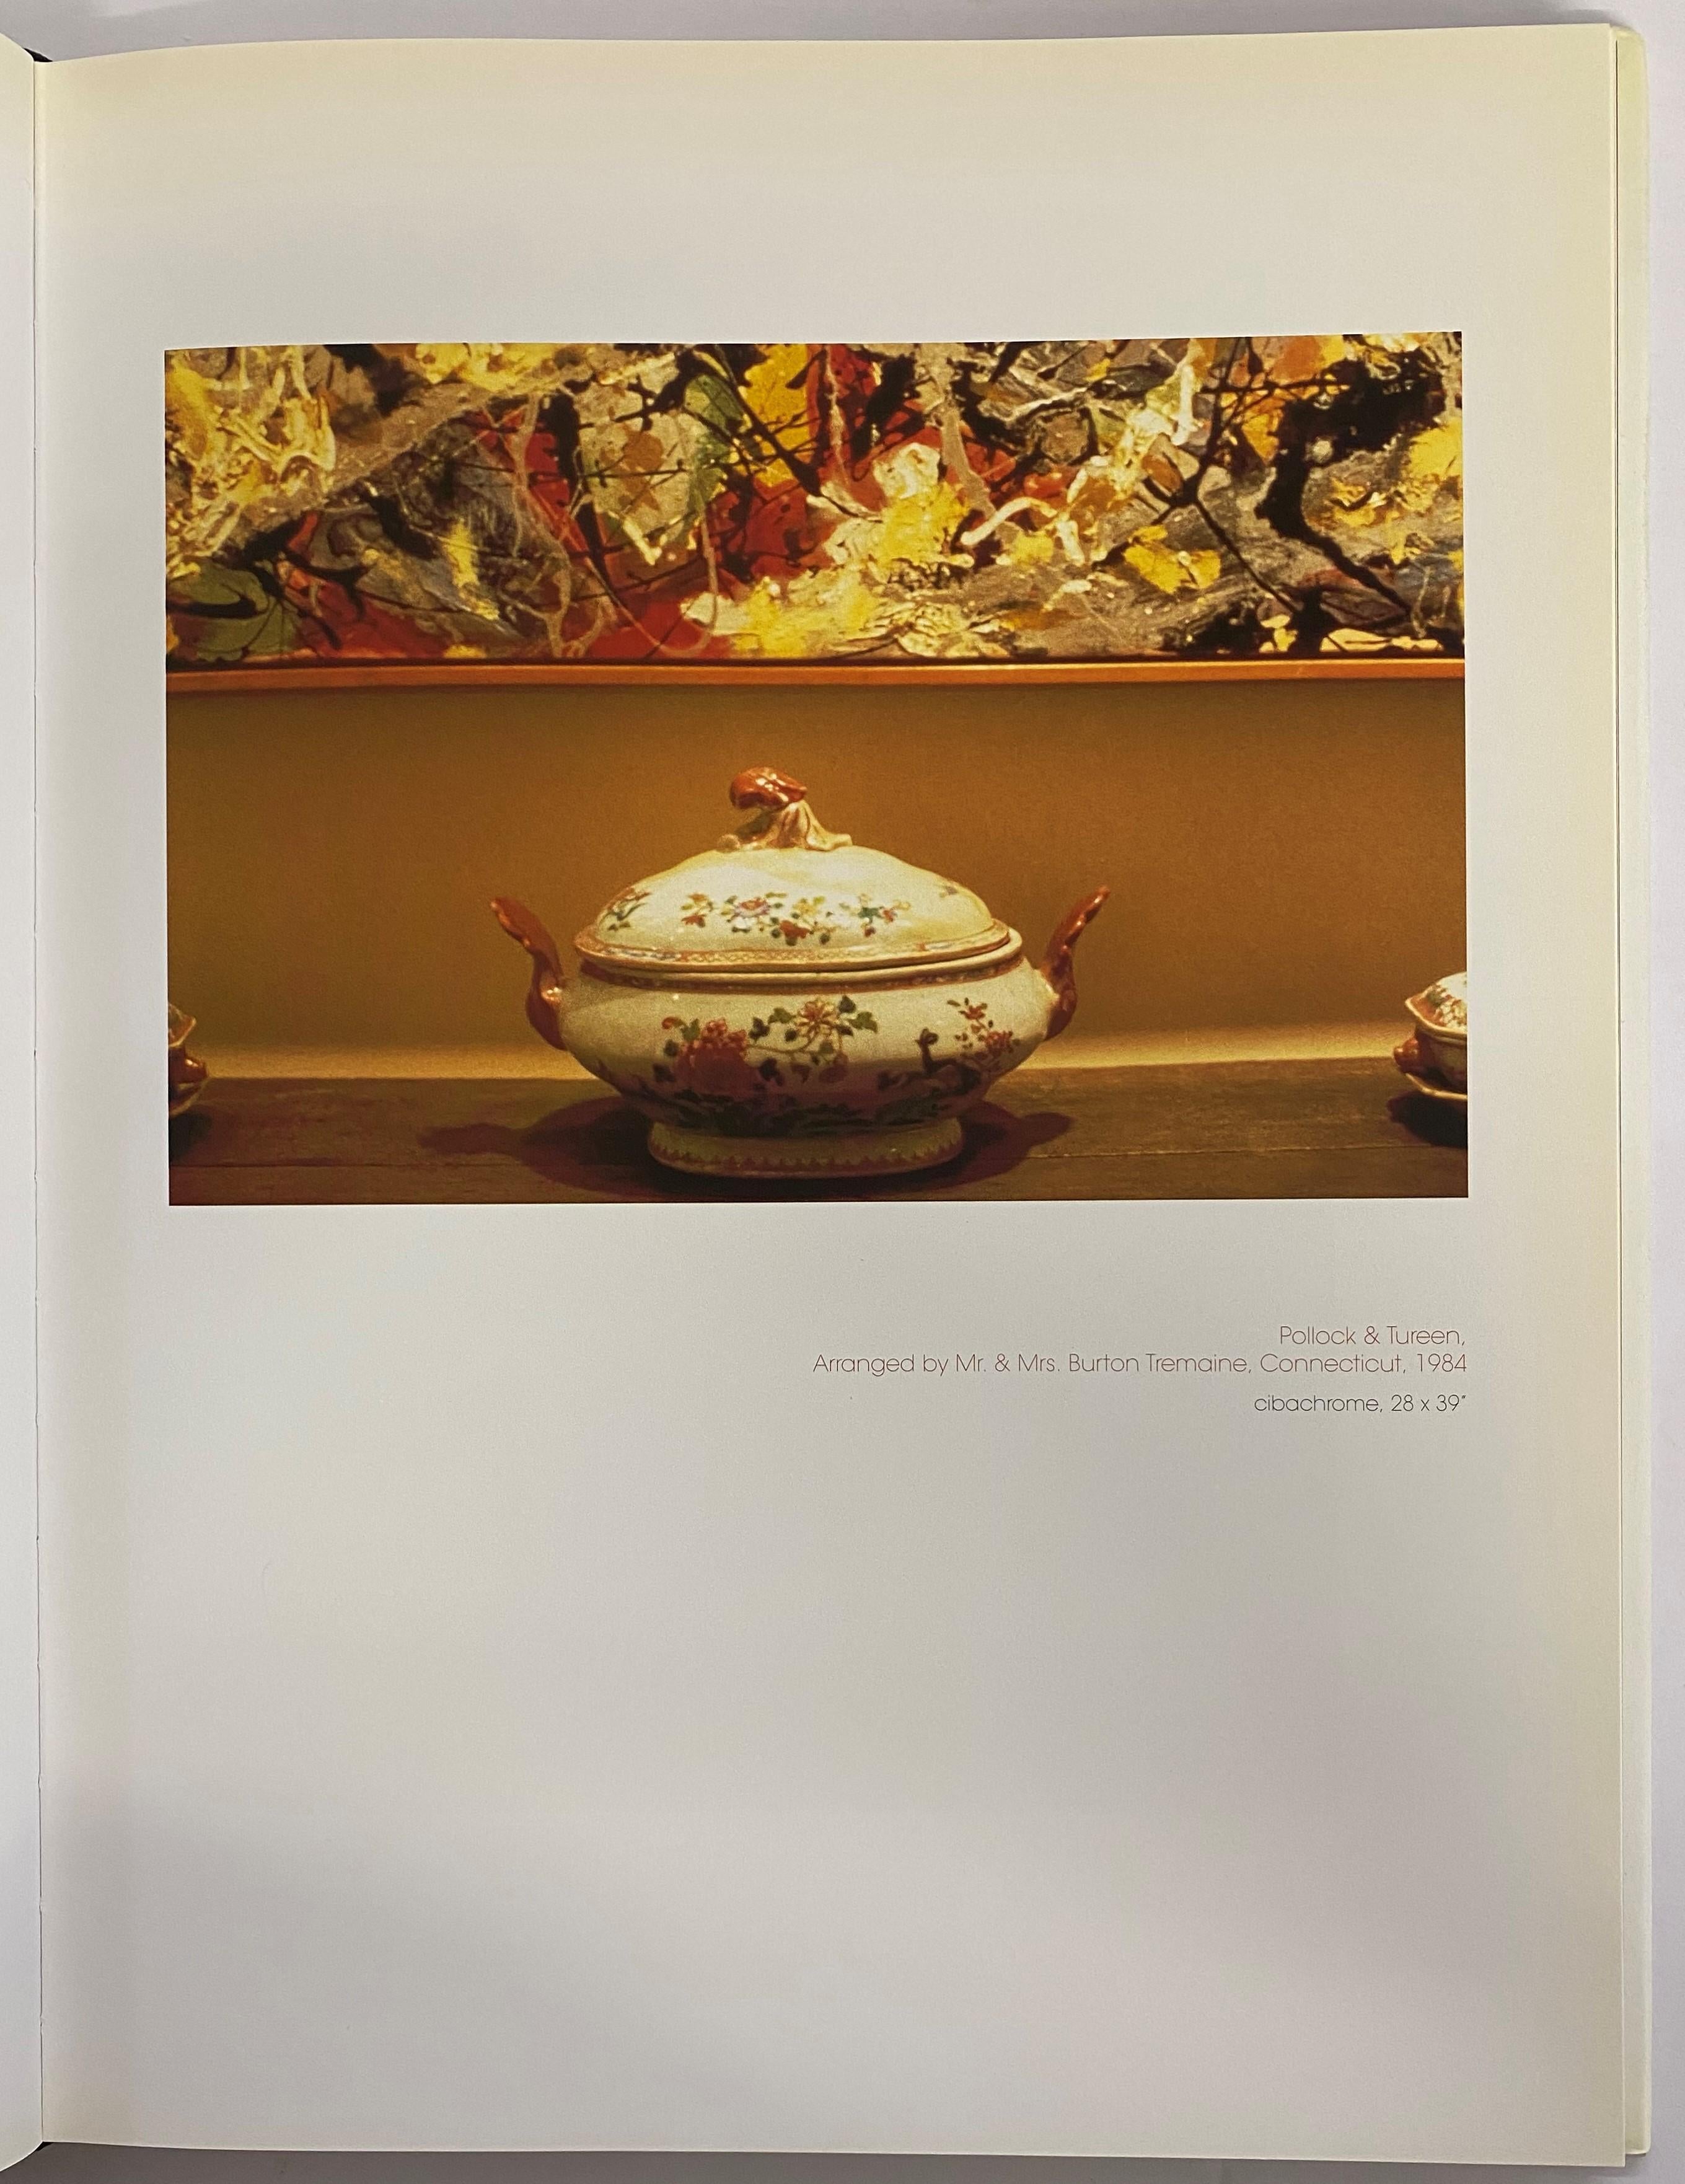 Paper Louise Lawler: an Arrangement of Pictures by Johannes Meinhardt (Book) For Sale